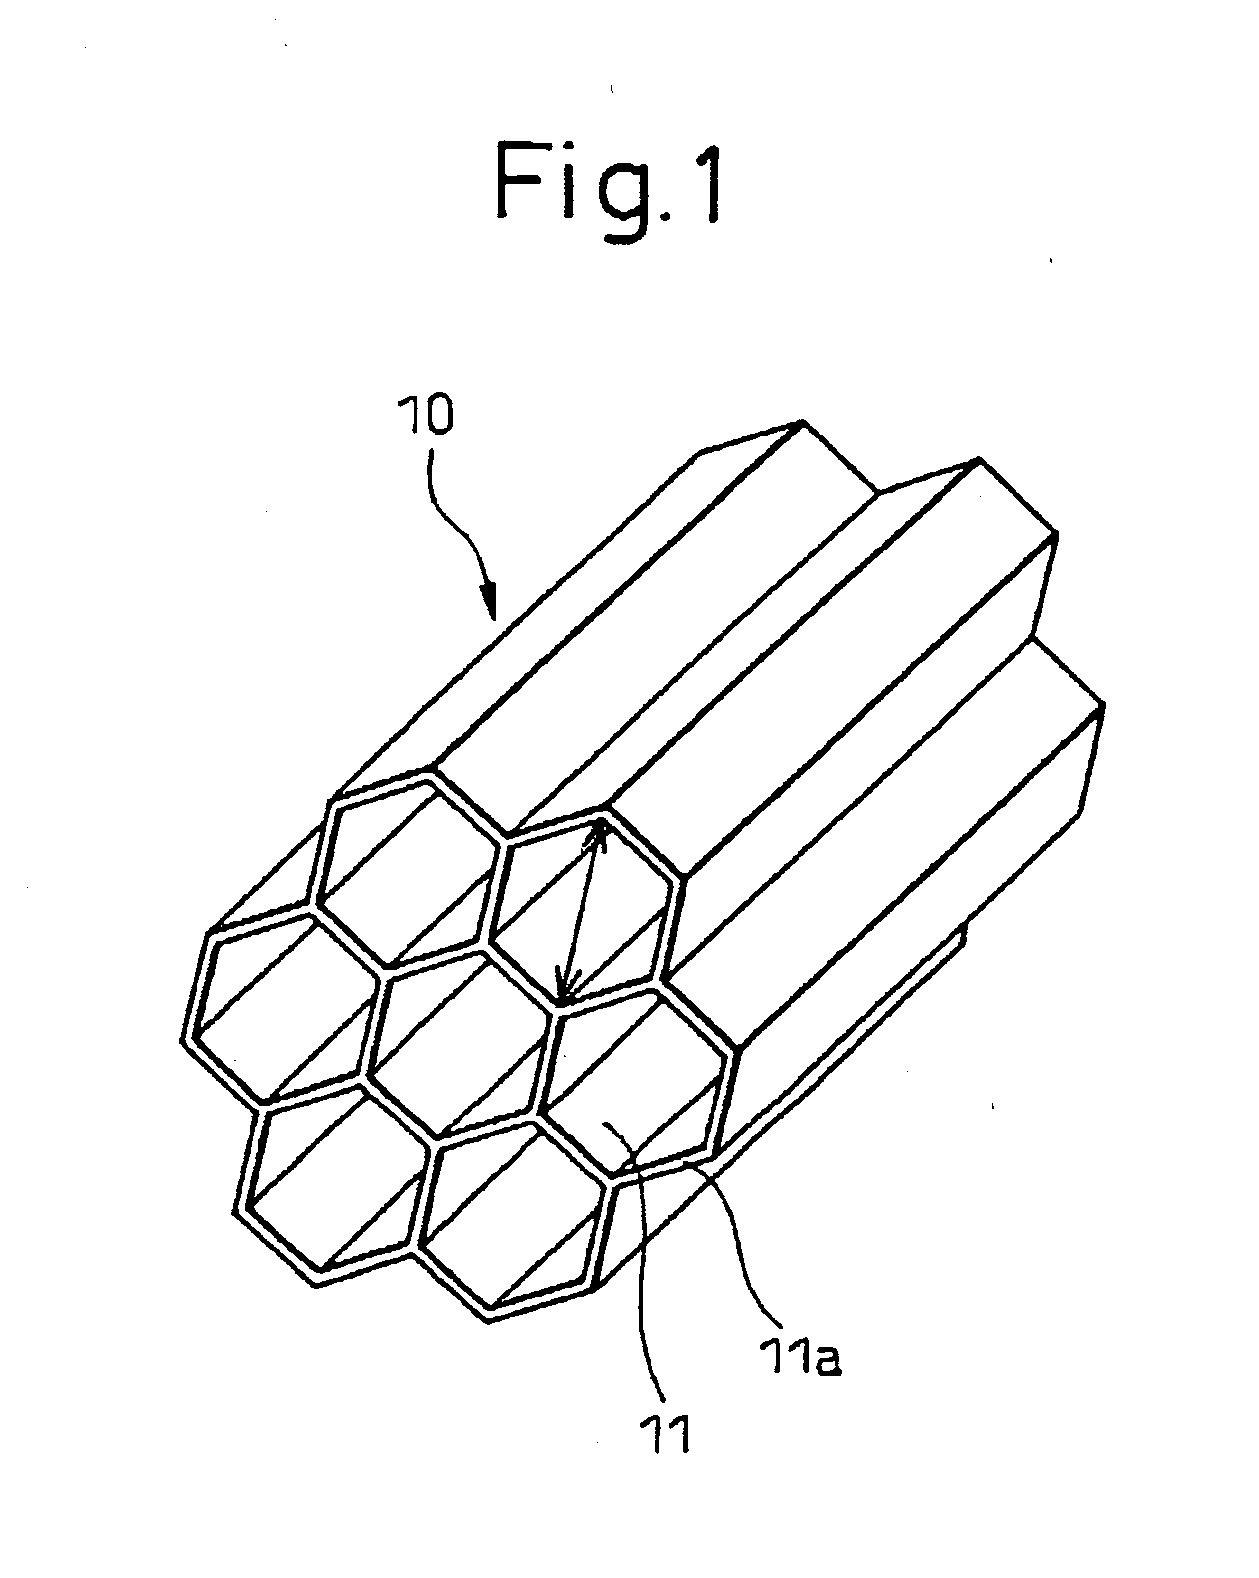 Process for producing mesoporous body